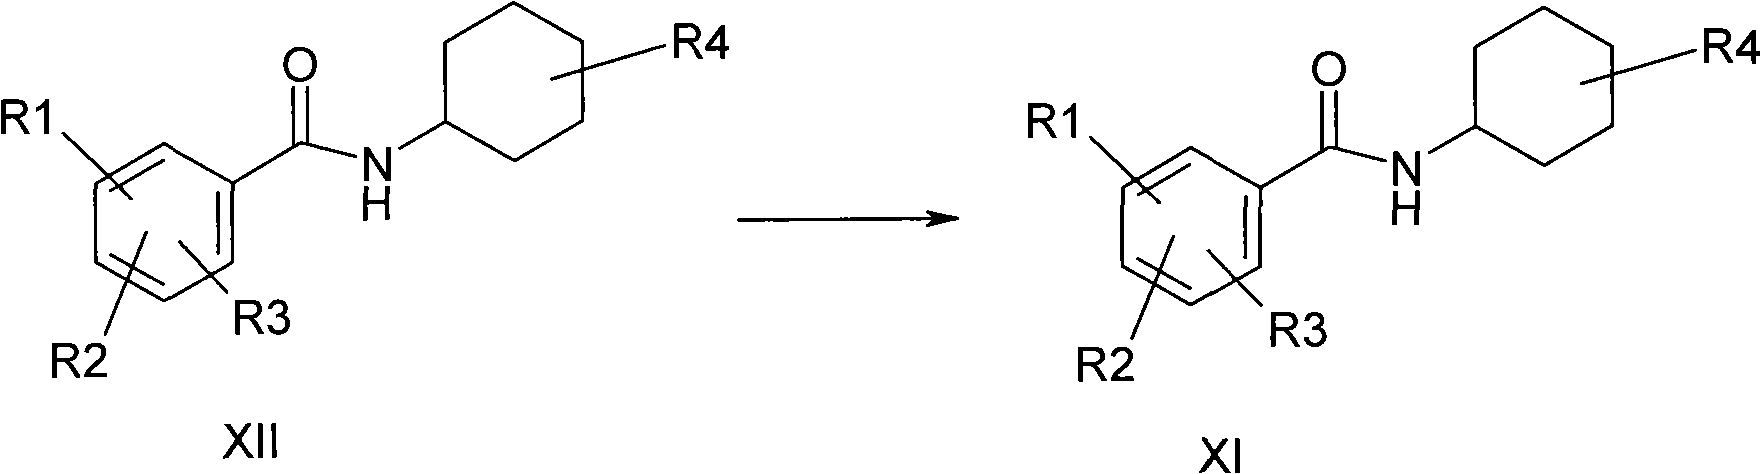 Process for preparing ambroxol, analogue thereof or salts thereof